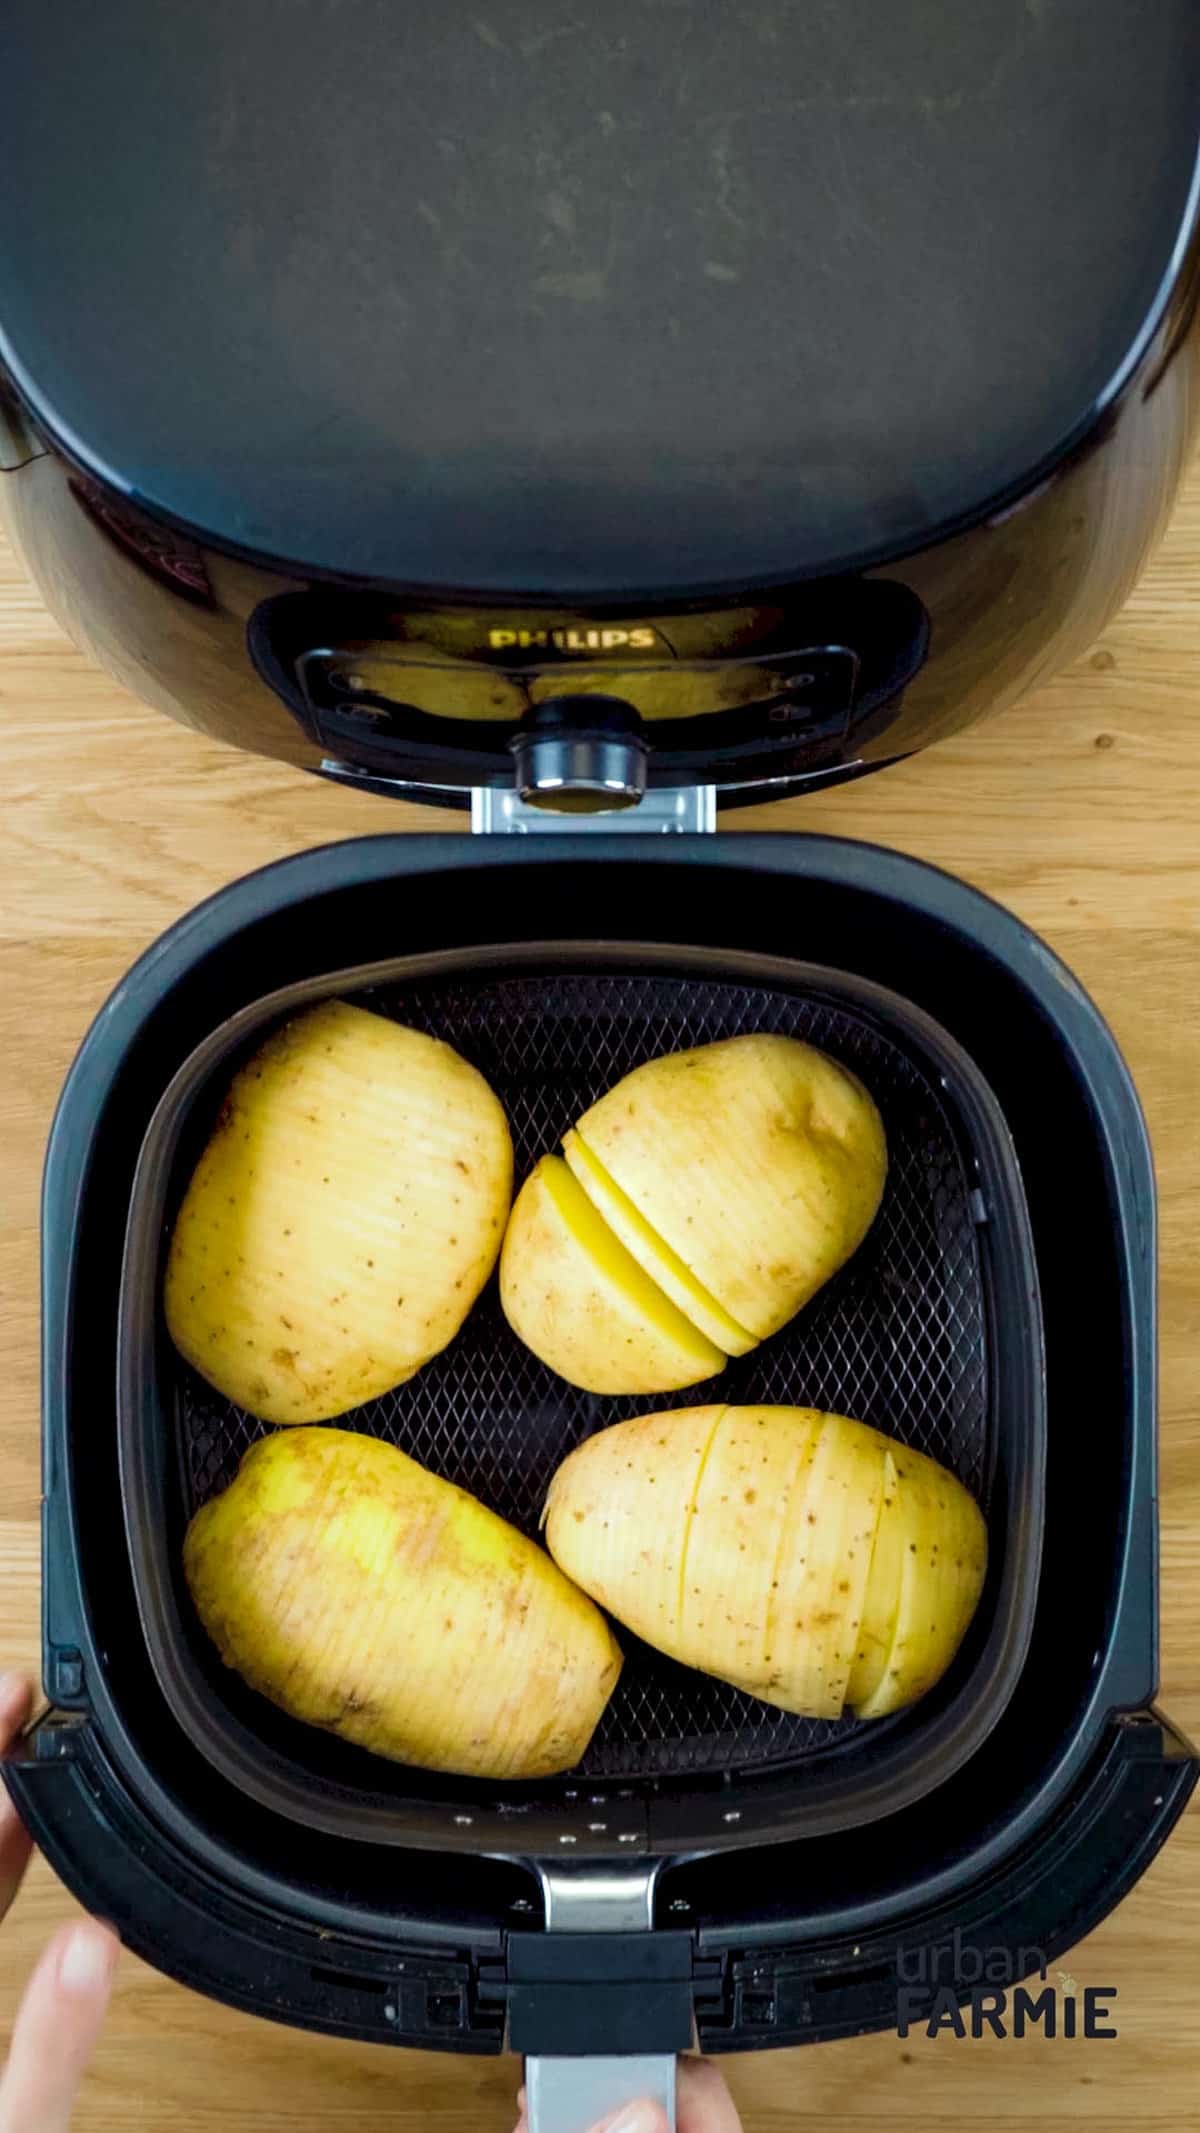 An image of slit potatoes in an airfryer.